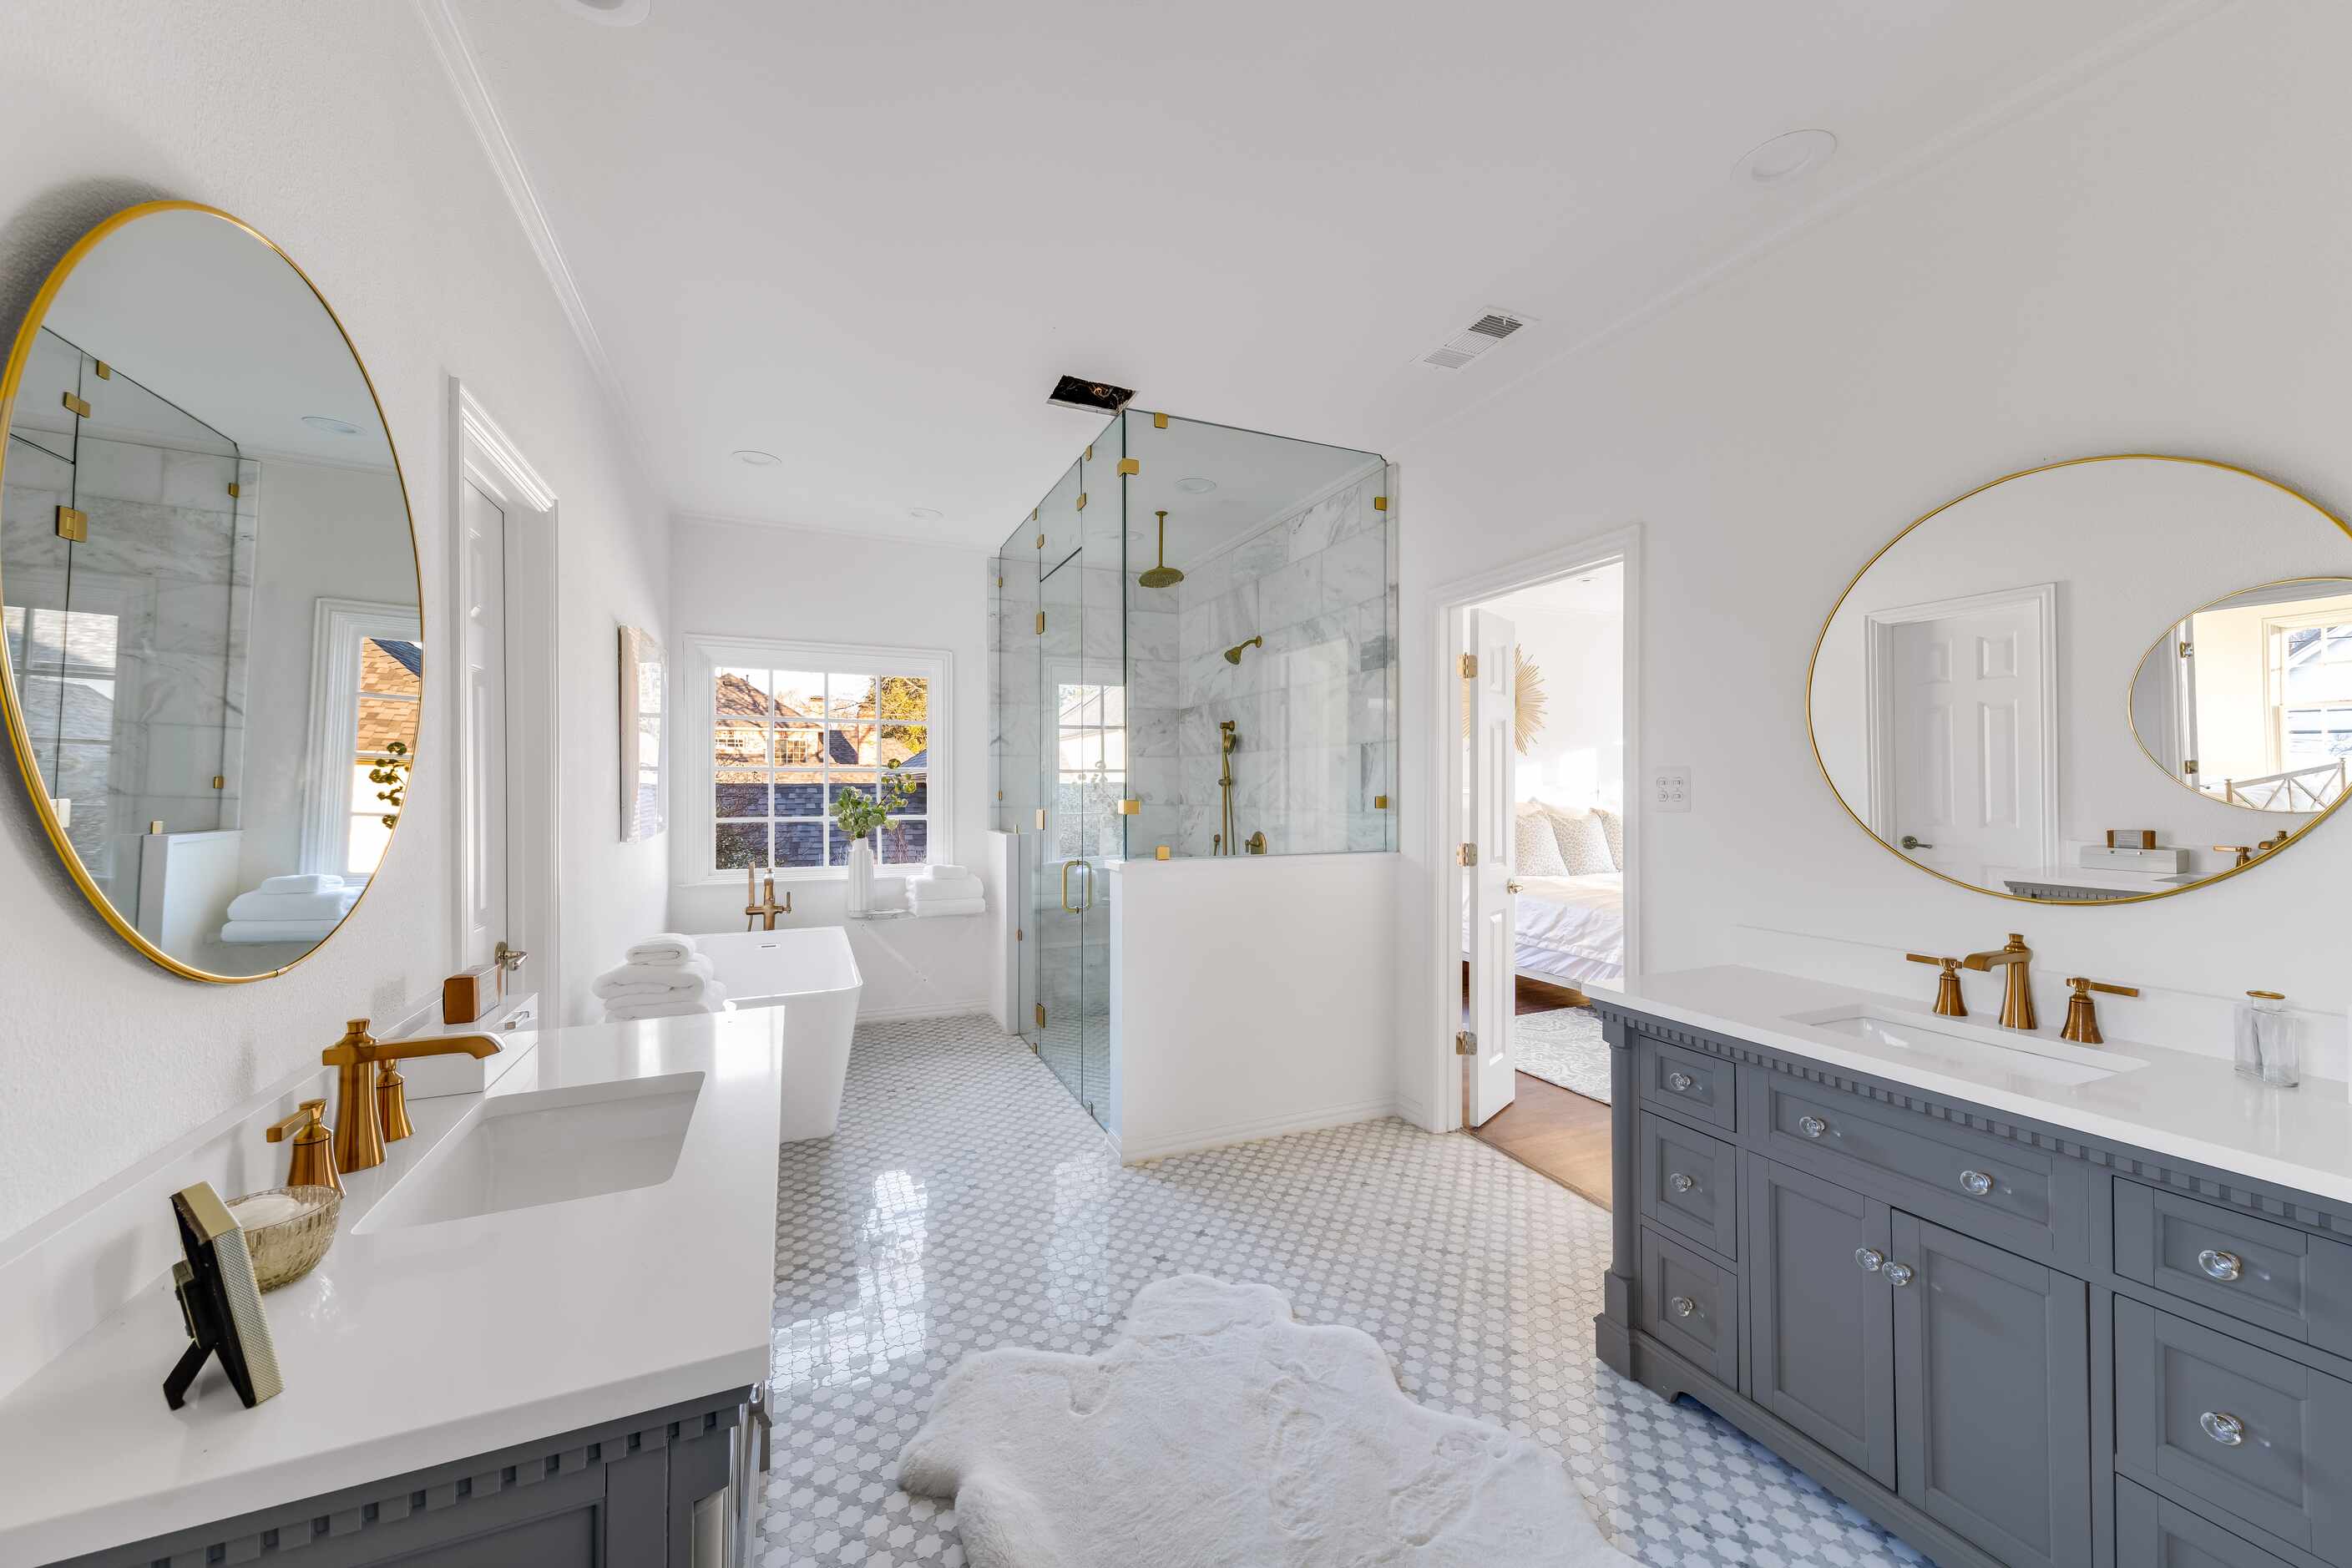 The primary bathroom features a large shower with glass doors and a large soaking tub.